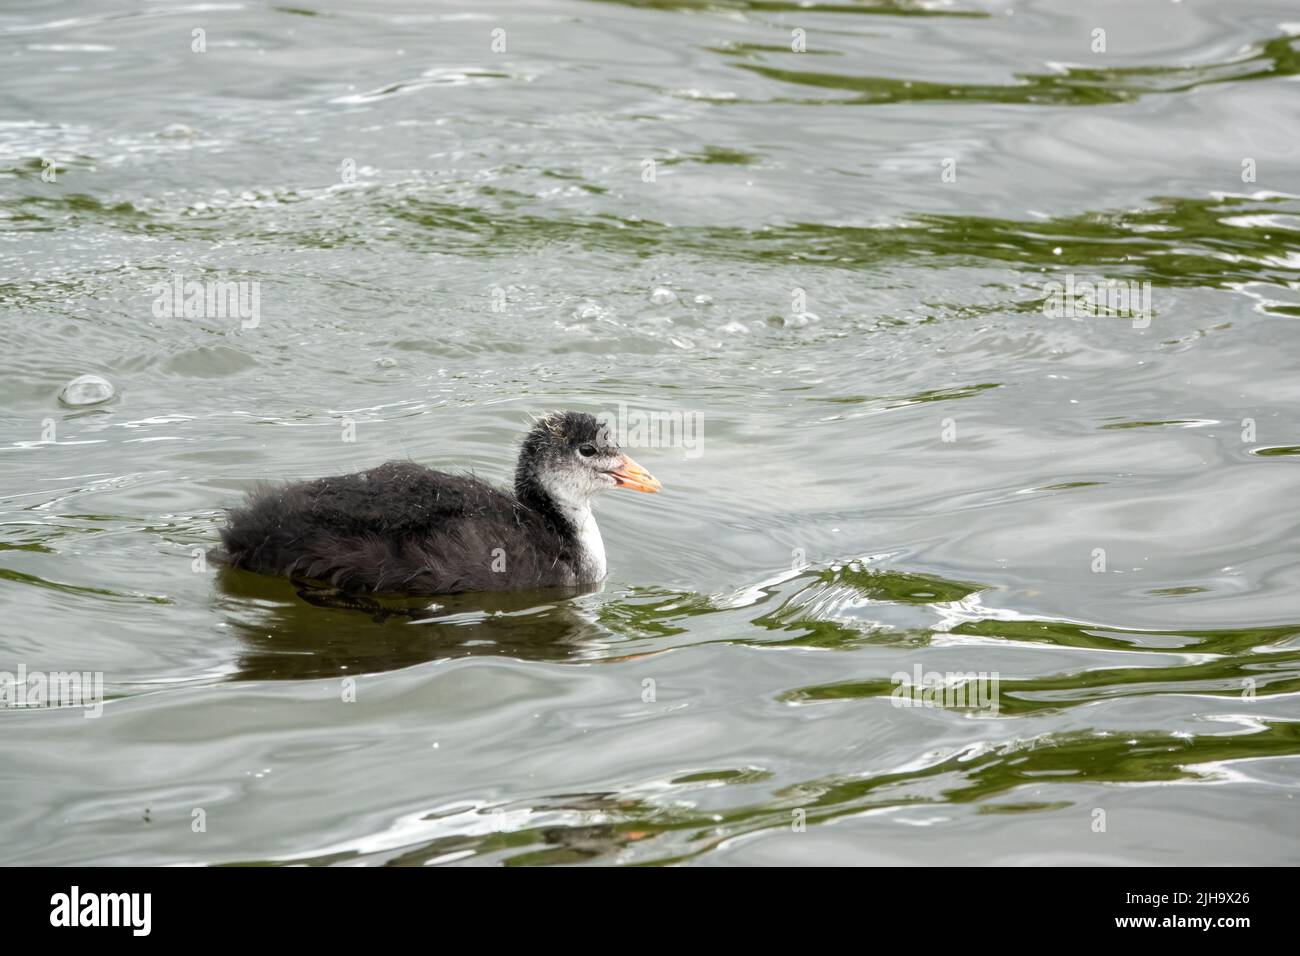 close up of a Common / Eurasian Coot chick (Fulica atra) on water Stock Photo